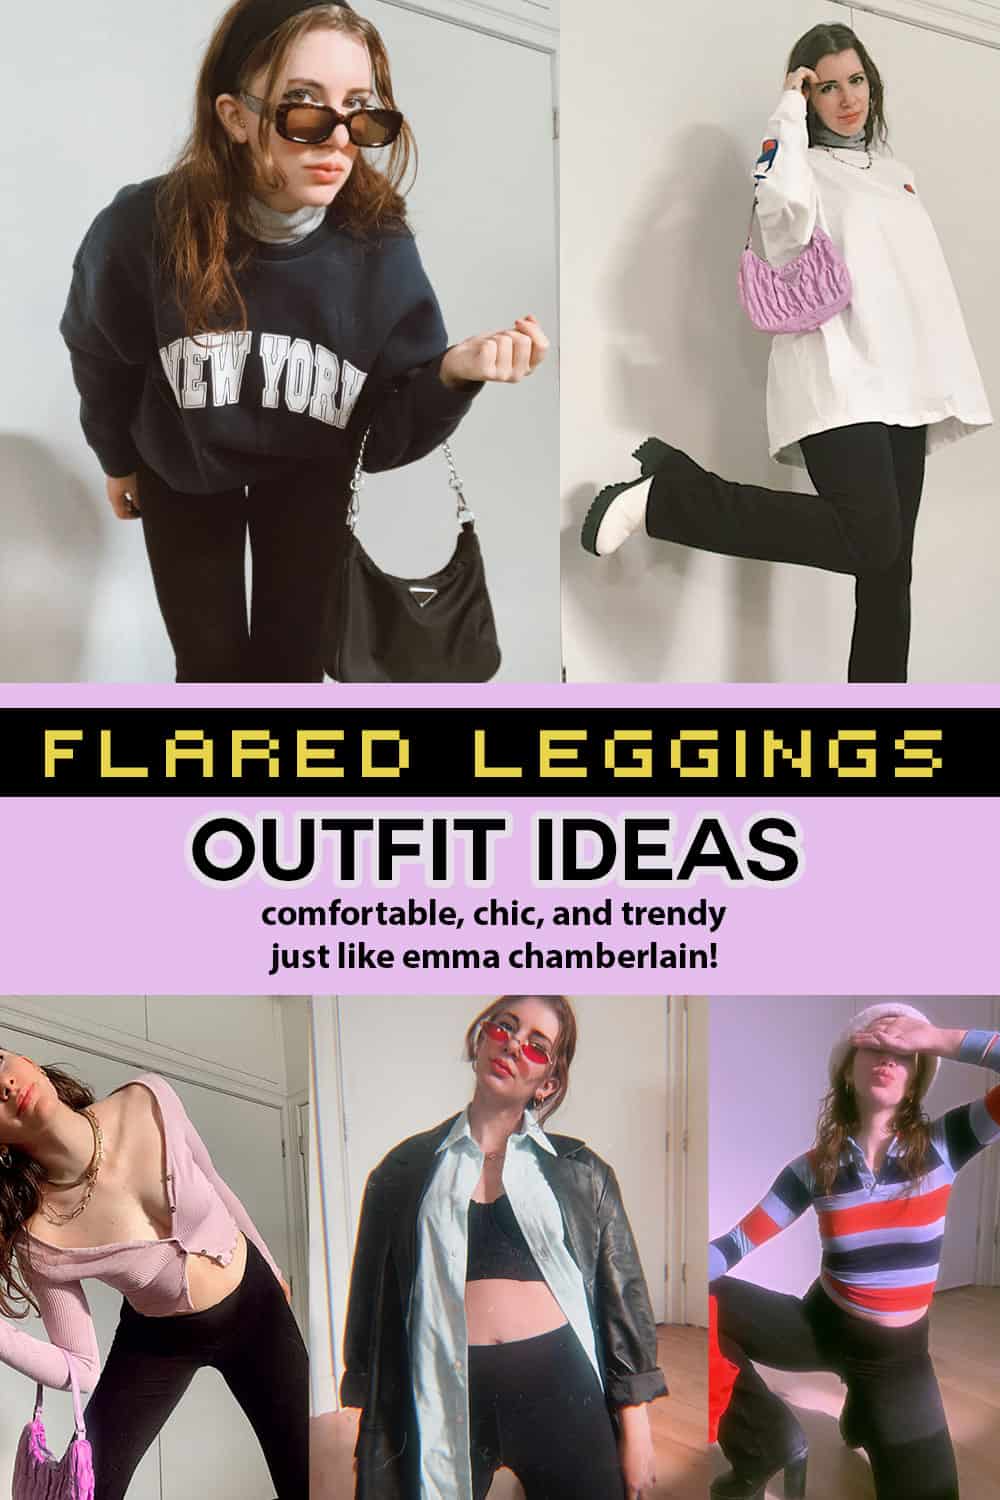 flare leggings outfits ideas (emma chamberlain inspired outfit black flare leggings and more)